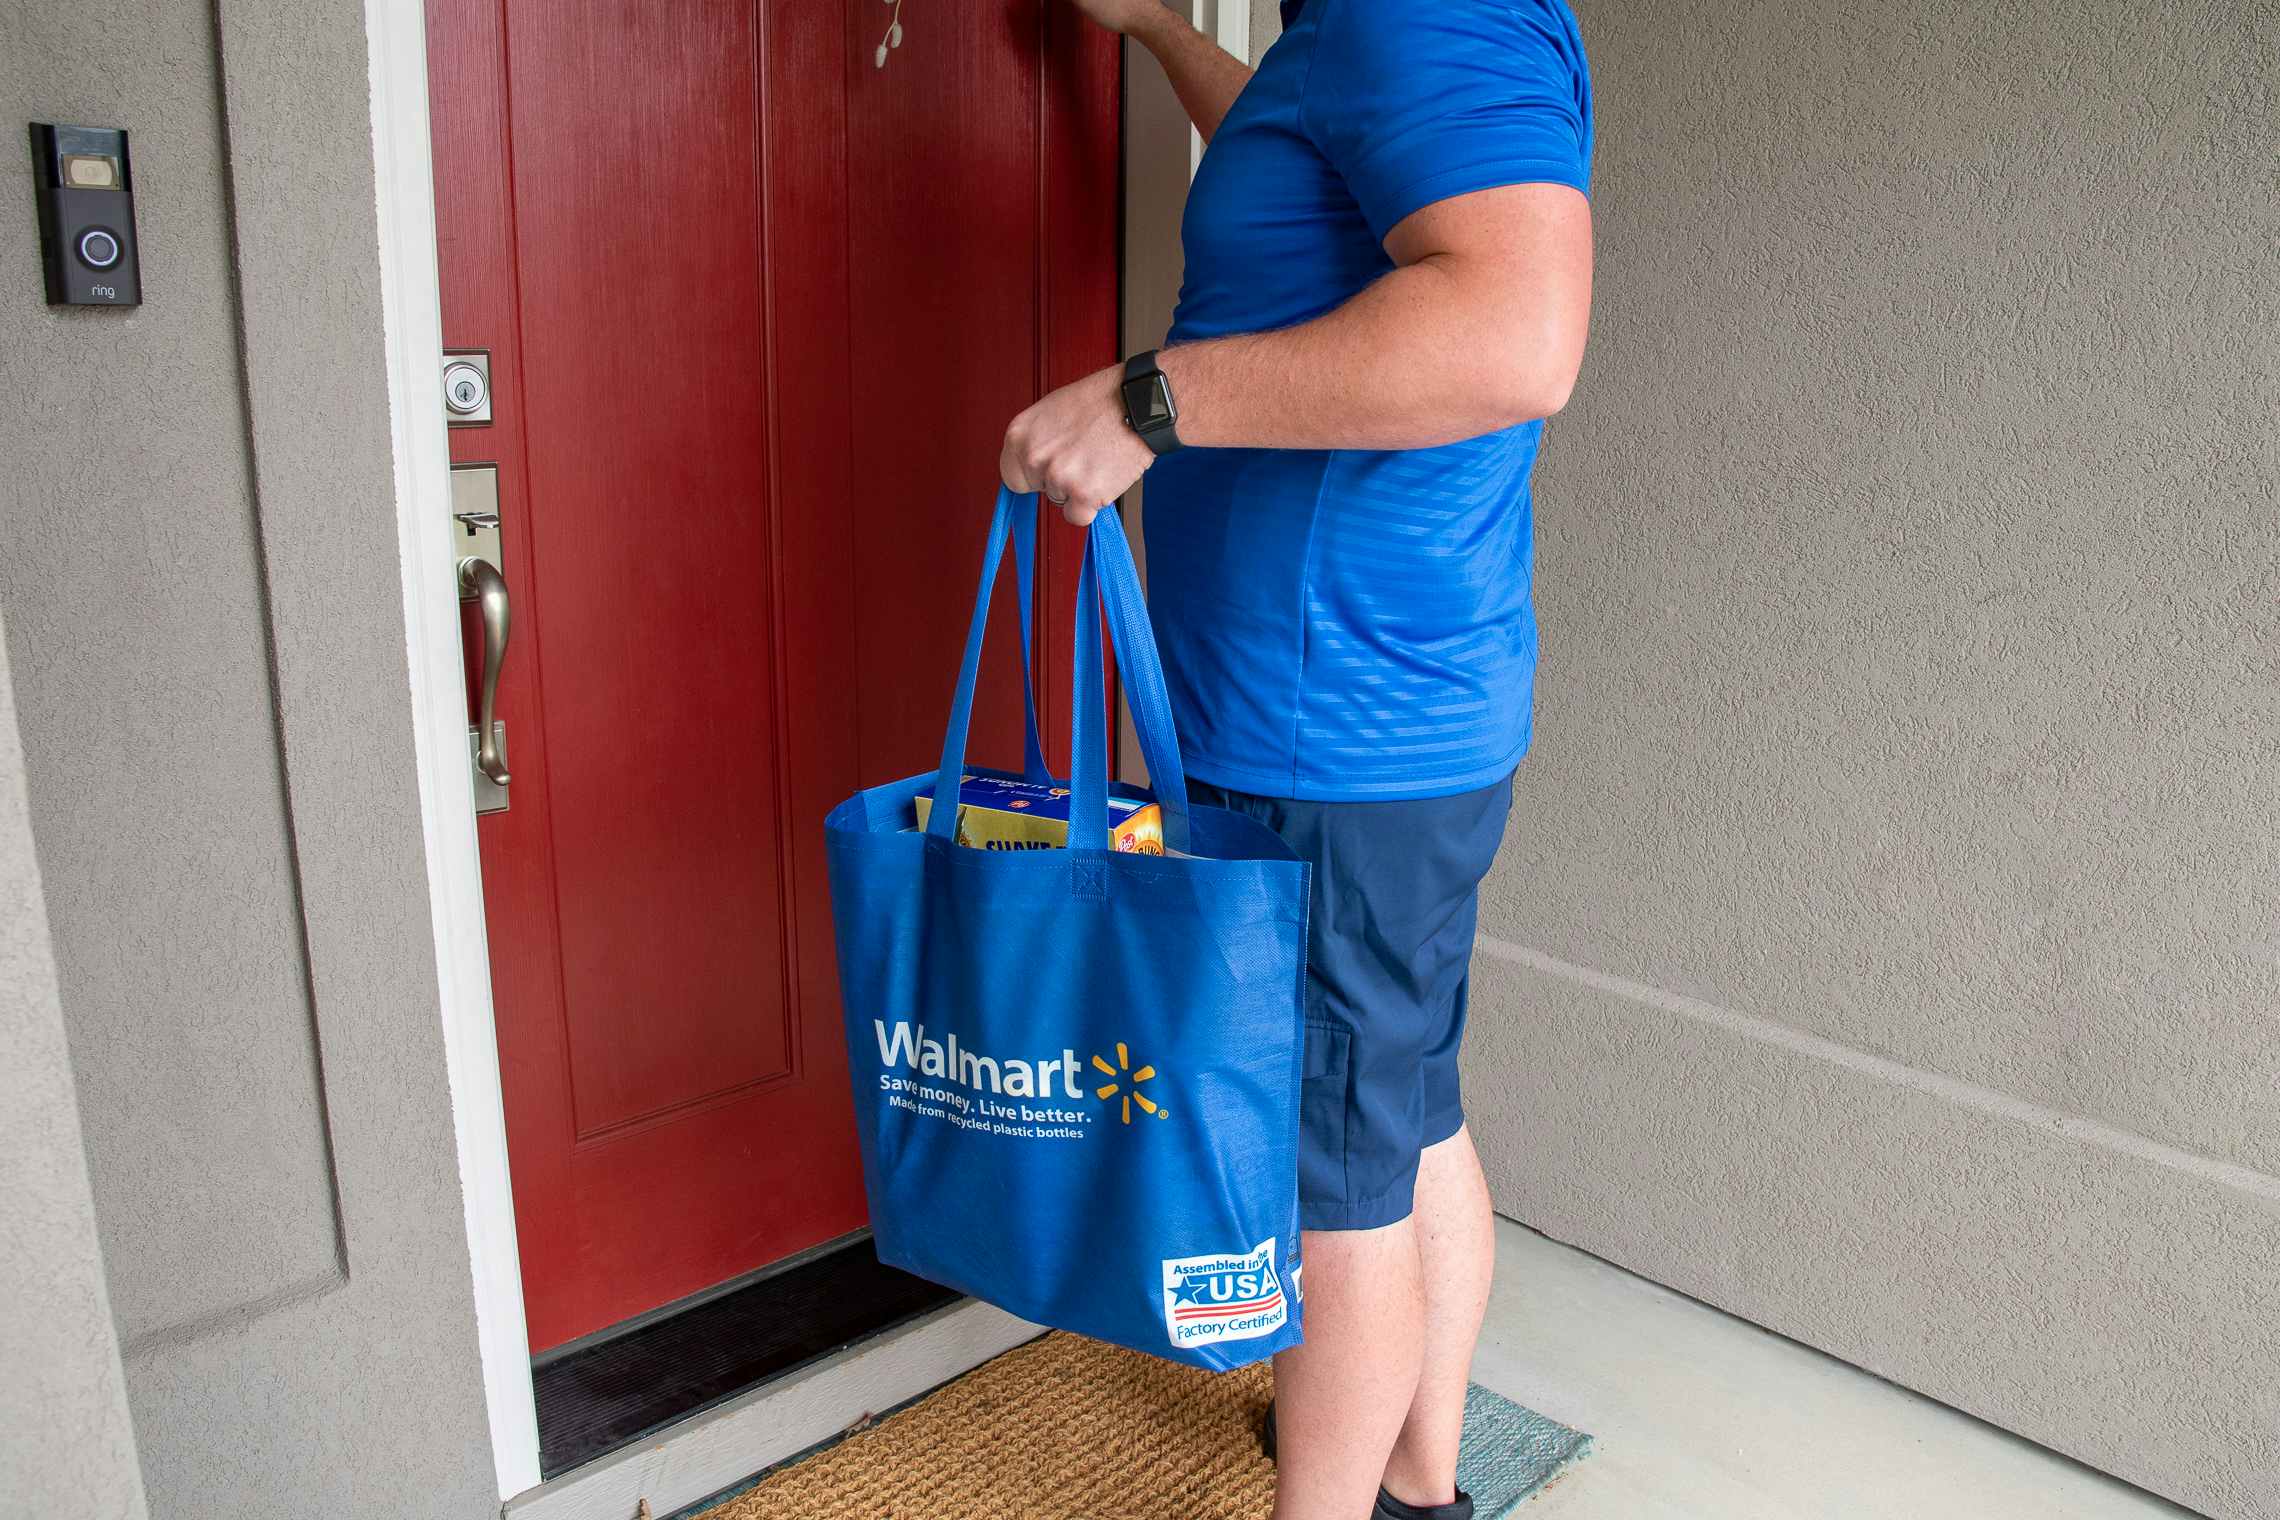 A walmart delivery employee knocking on a front door.